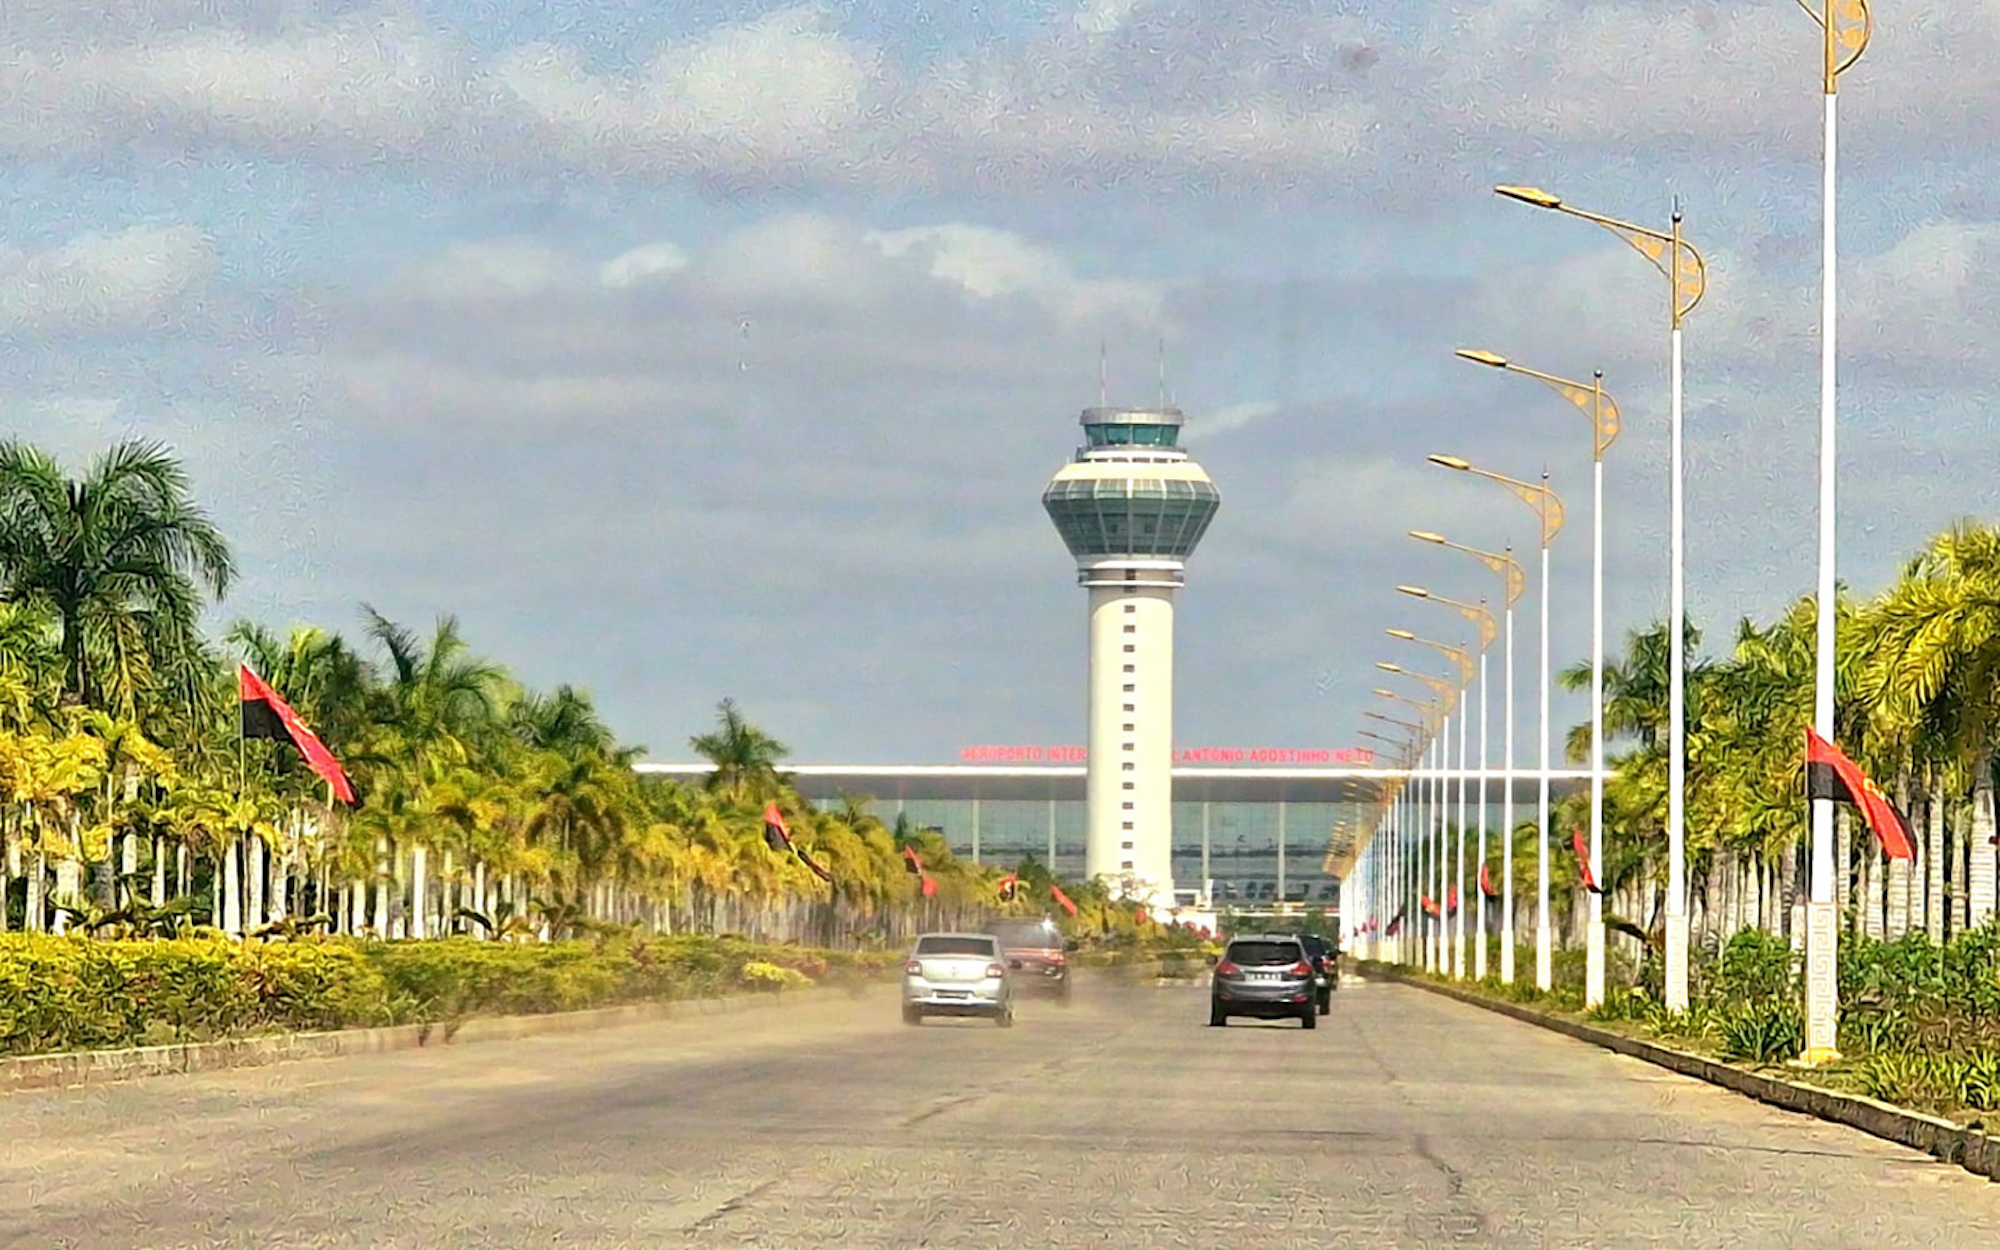 The new international airport in Luanda could start operating at the end of the year